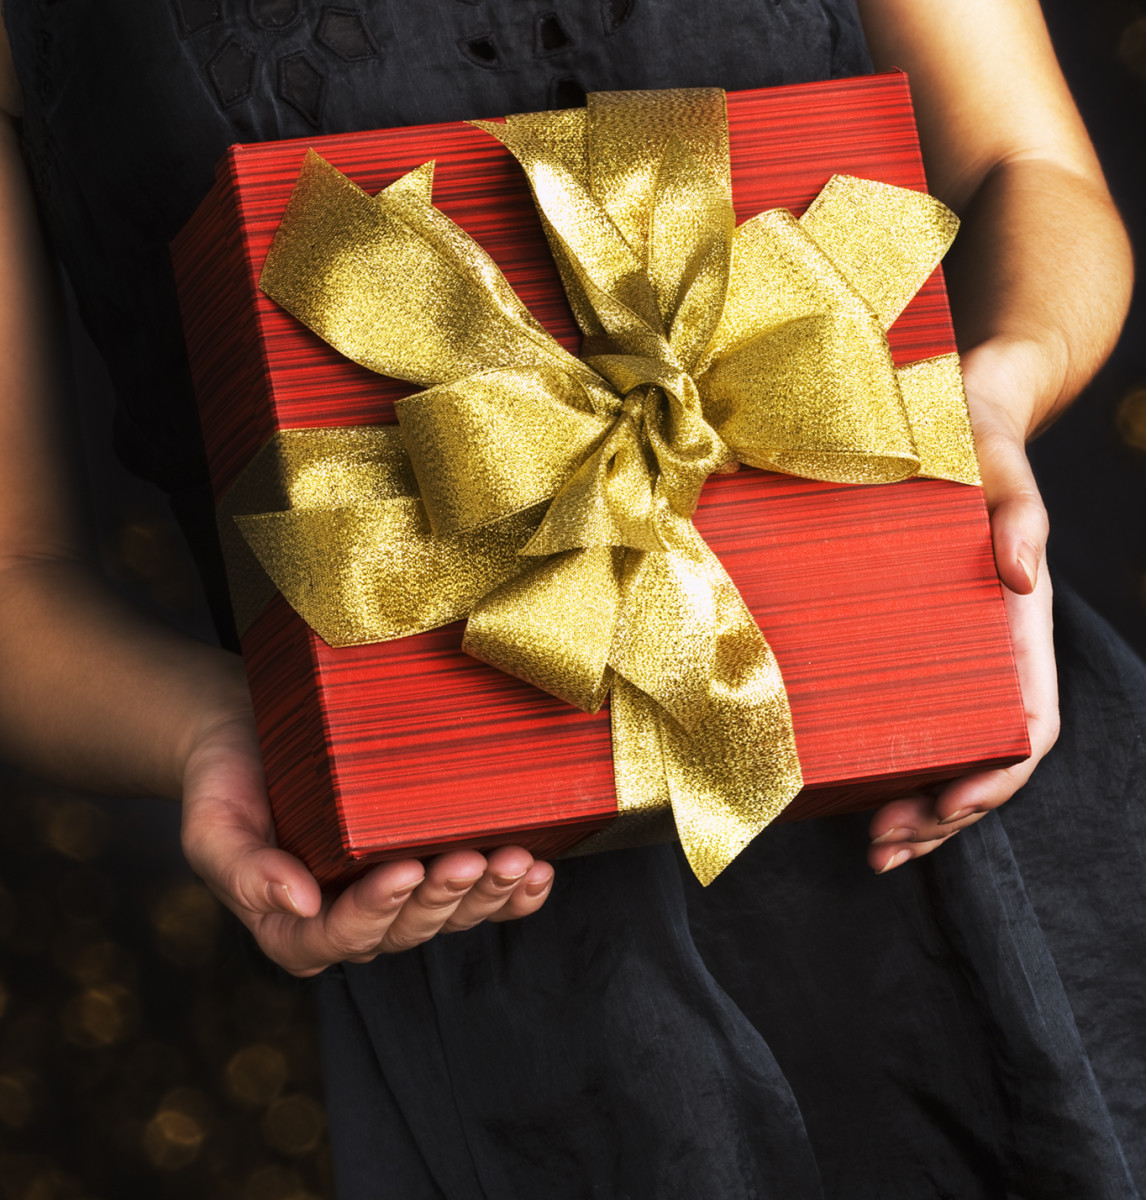 Spending a lot of money on a gift for a coworker is very generous, but there are plenty of great gifts out there that won't break the bank if you're on a budget. 